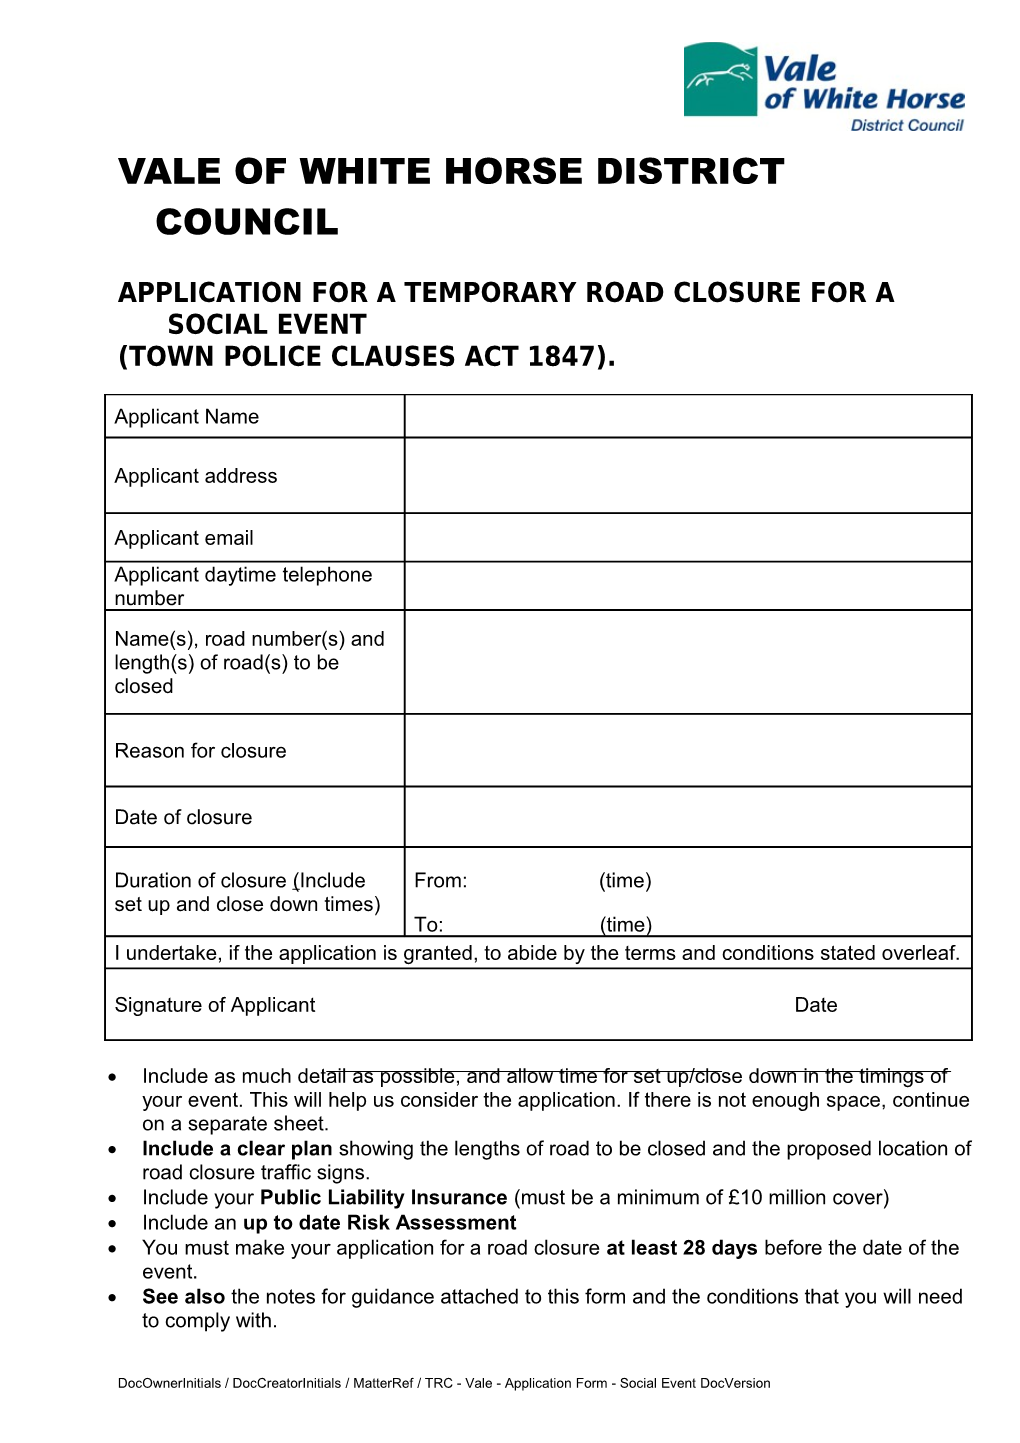 Application for a Temporary Road Closure for a Social Event